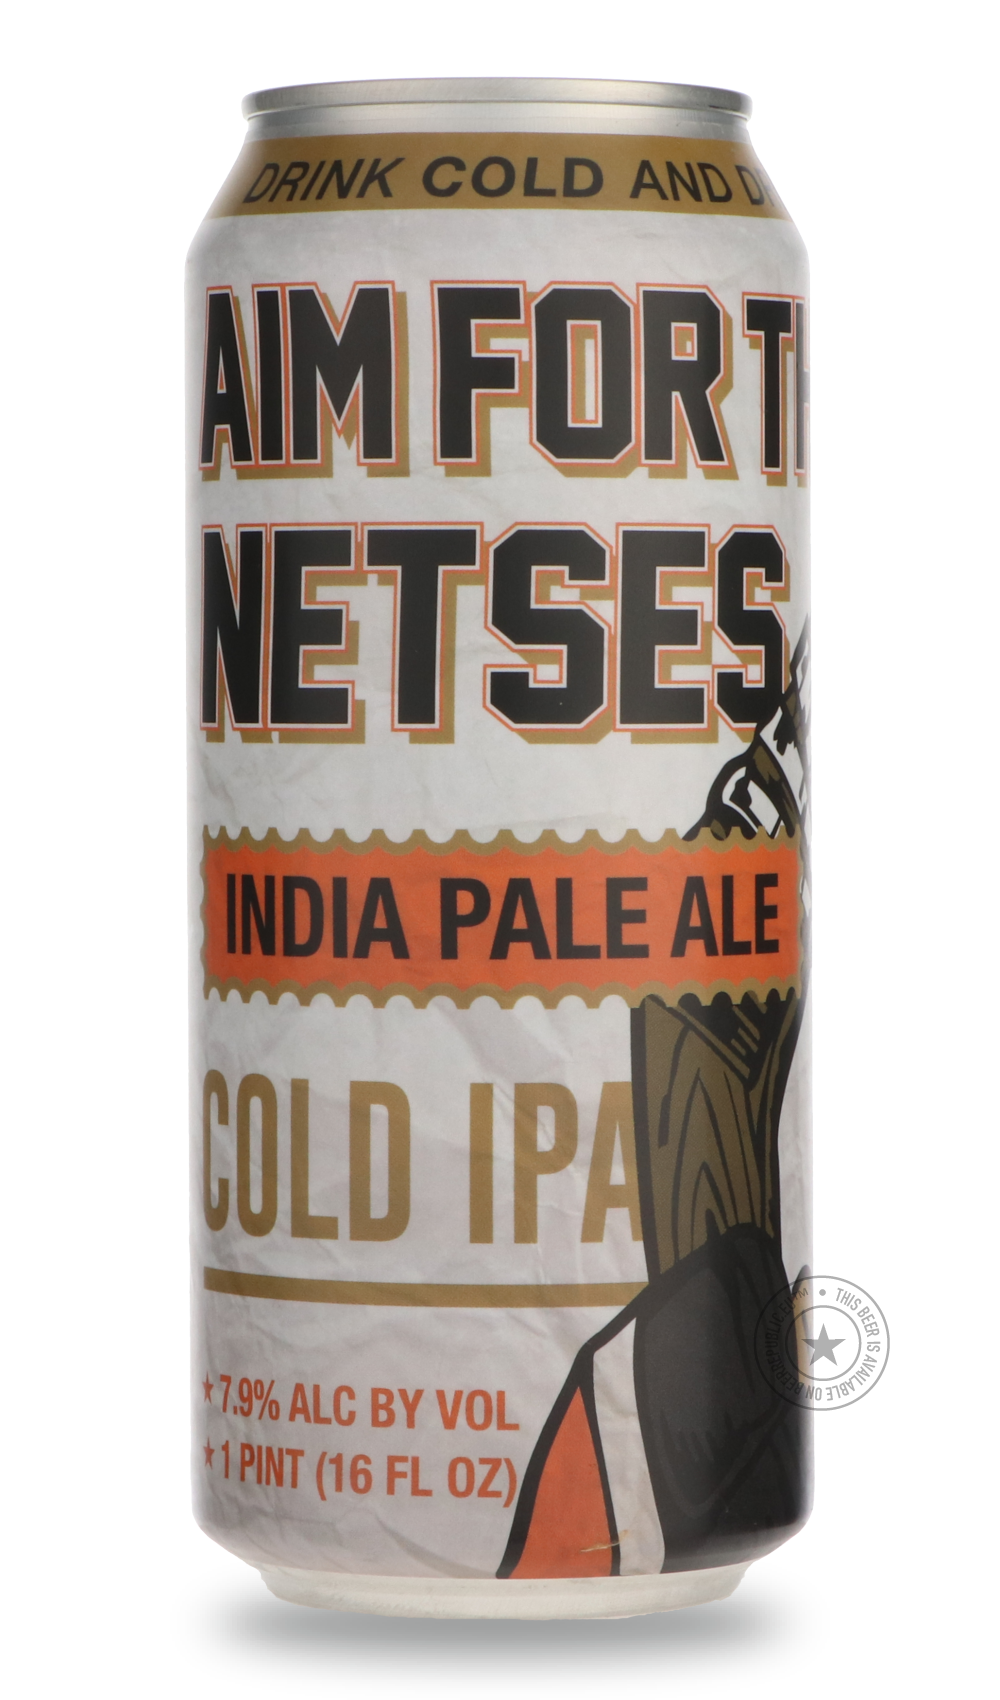 -Noble- Aim For the Netses!-IPA- Only @ Beer Republic - The best online beer store for American & Canadian craft beer - Buy beer online from the USA and Canada - Bier online kopen - Amerikaans bier kopen - Craft beer store - Craft beer kopen - Amerikanisch bier kaufen - Bier online kaufen - Acheter biere online - IPA - Stout - Porter - New England IPA - Hazy IPA - Imperial Stout - Barrel Aged - Barrel Aged Imperial Stout - Brown - Dark beer - Blond - Blonde - Pilsner - Lager - Wheat - Weizen - Amber - Barle